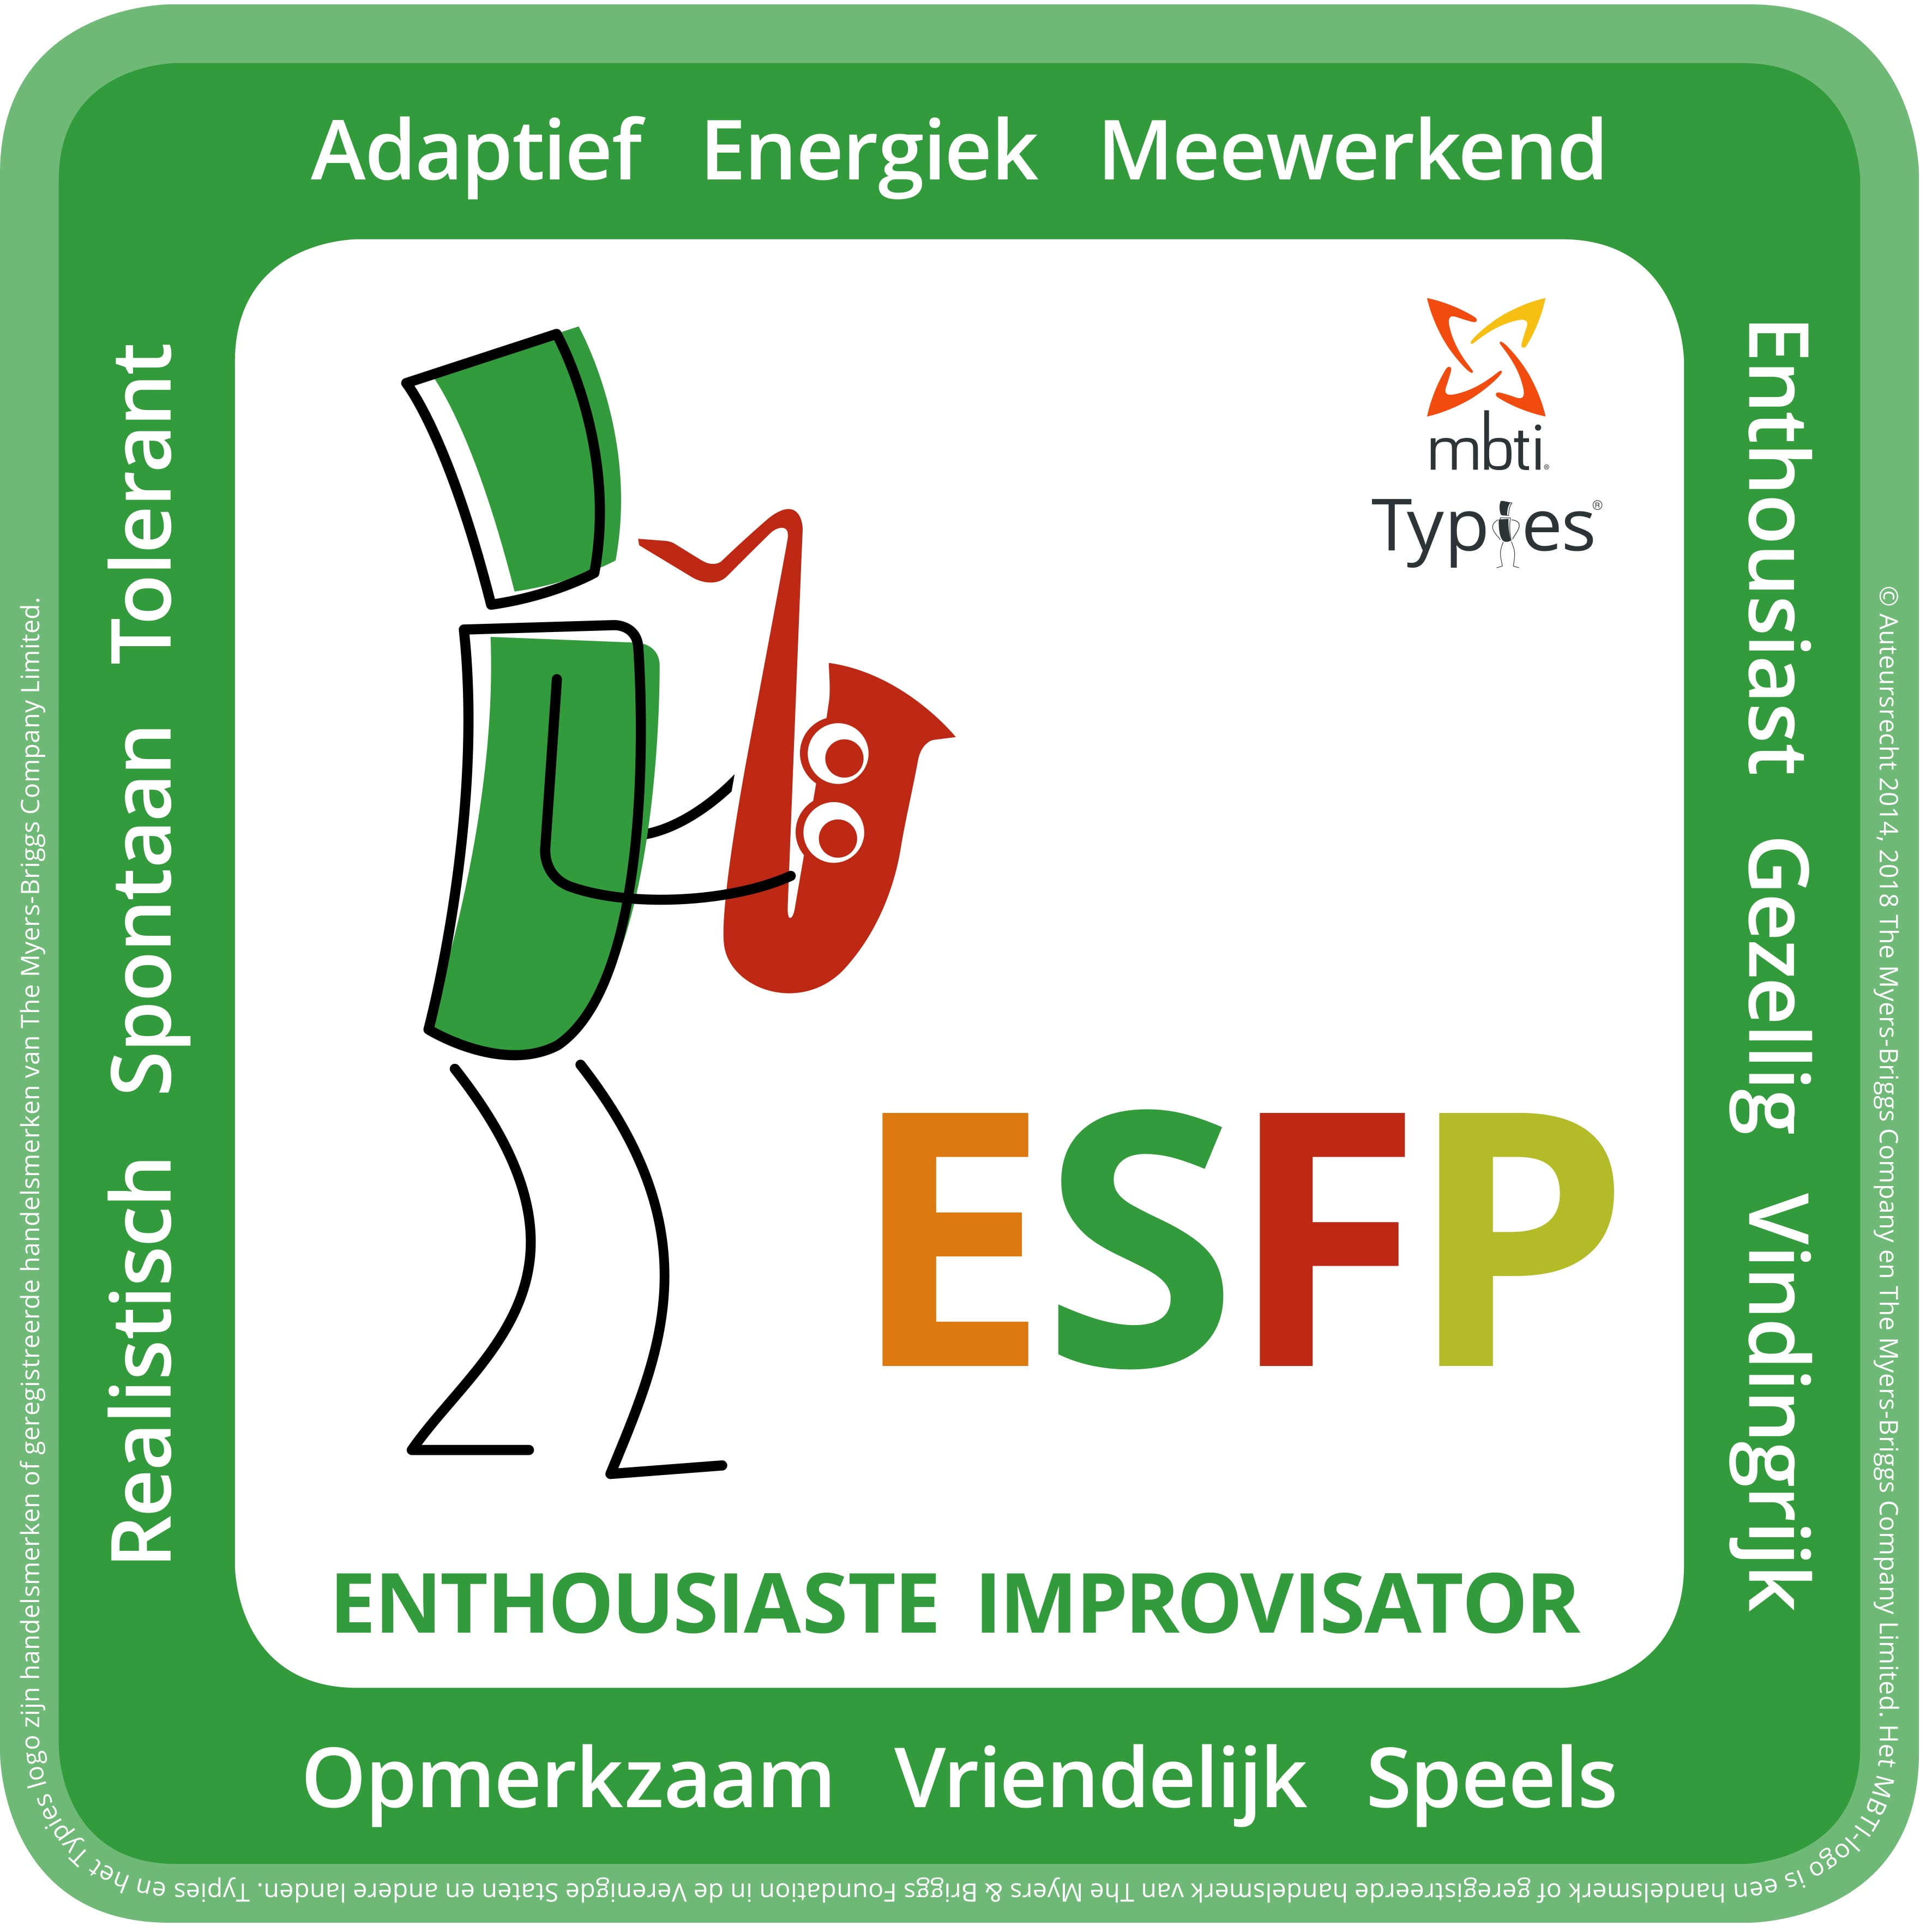 Typical characteristics of an ESFP